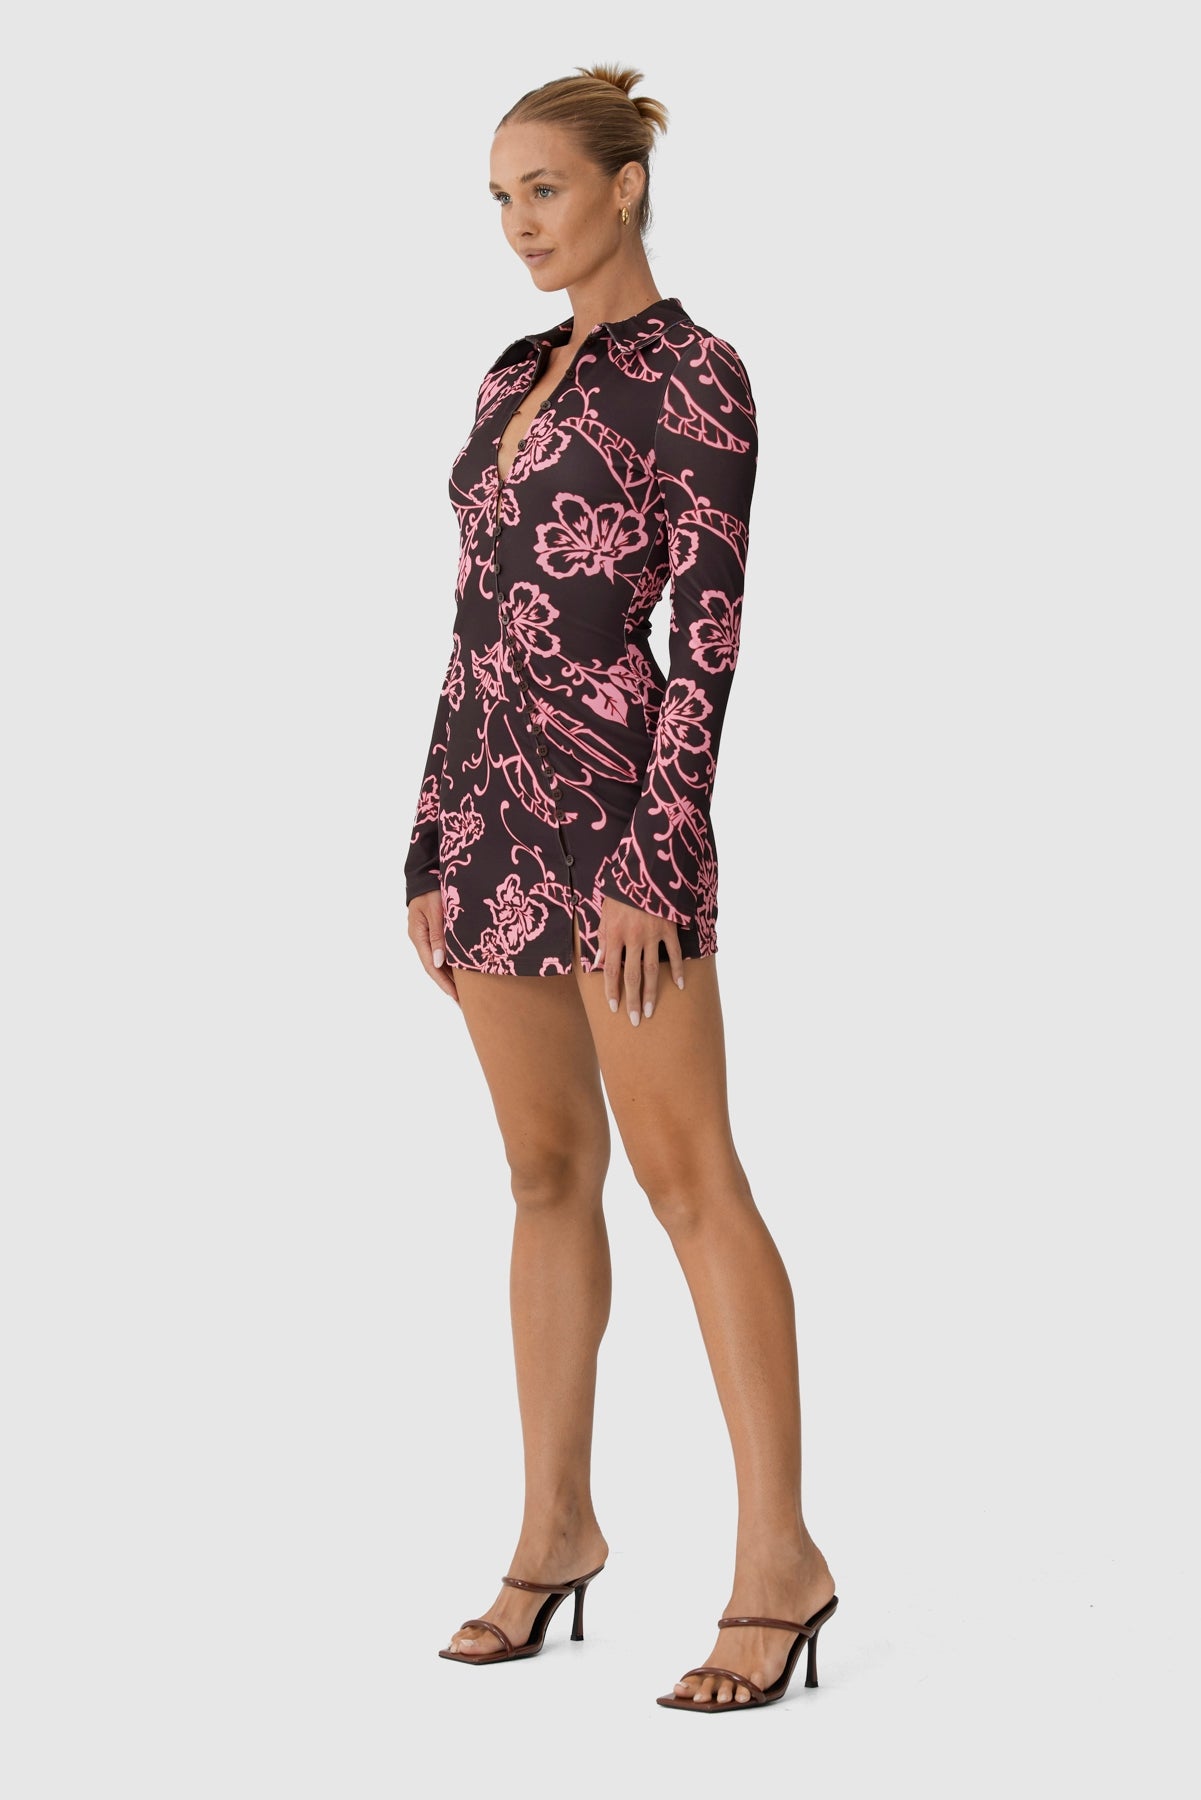 Finders - Eloise Mini Dress - Chocolate Tropical Floral